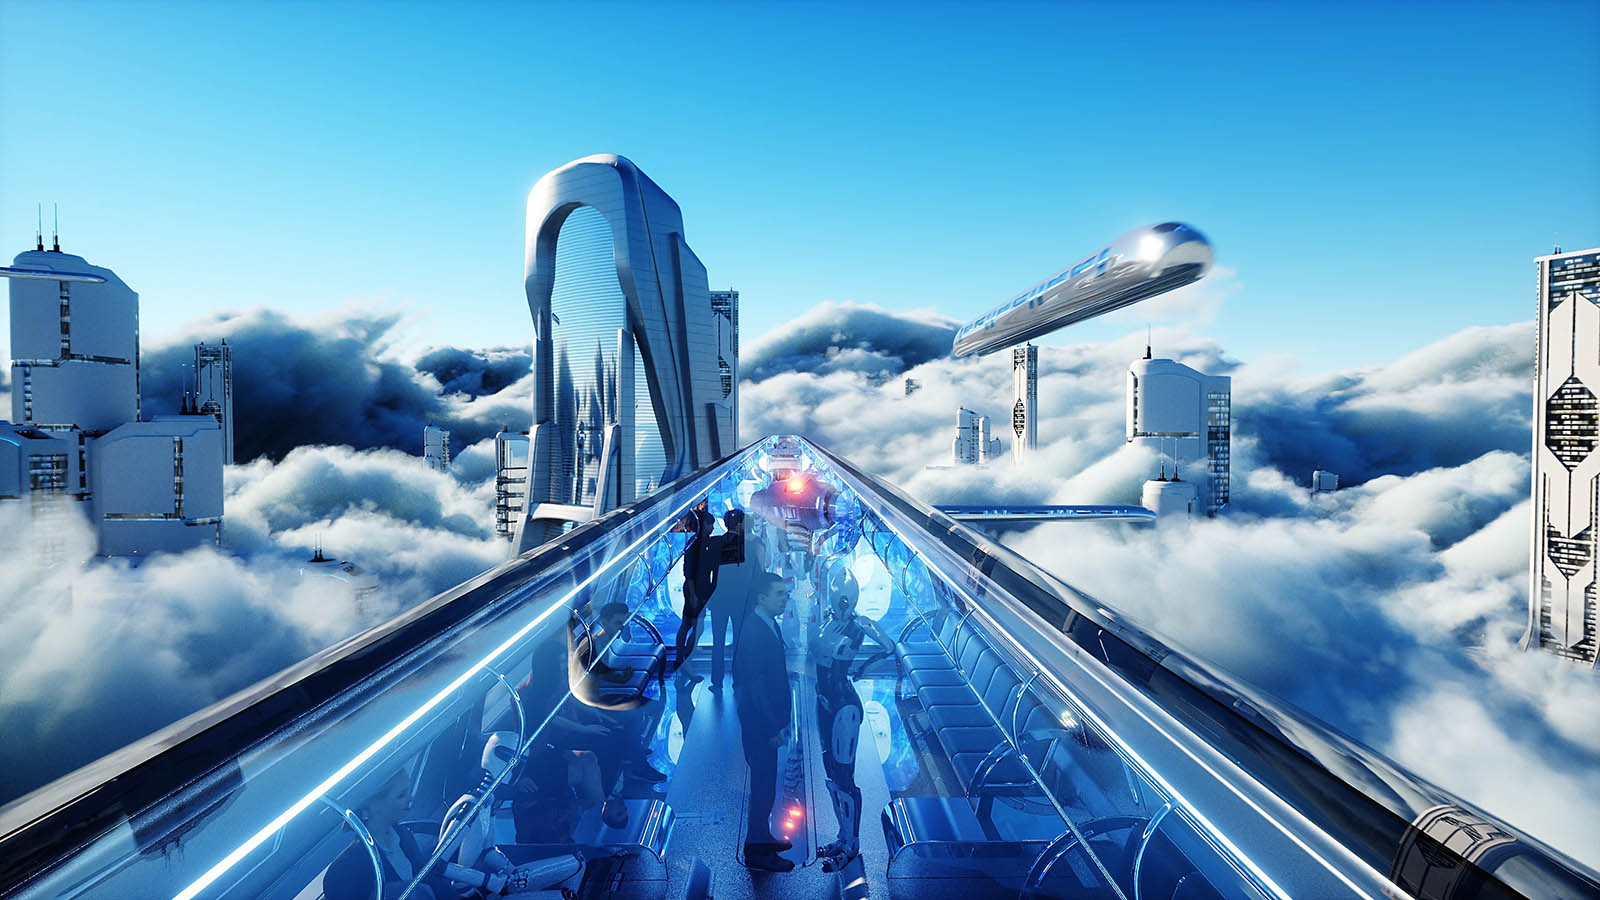 20 Story Ideas About the Future - Science Fiction IdeasScience Fiction Ideas